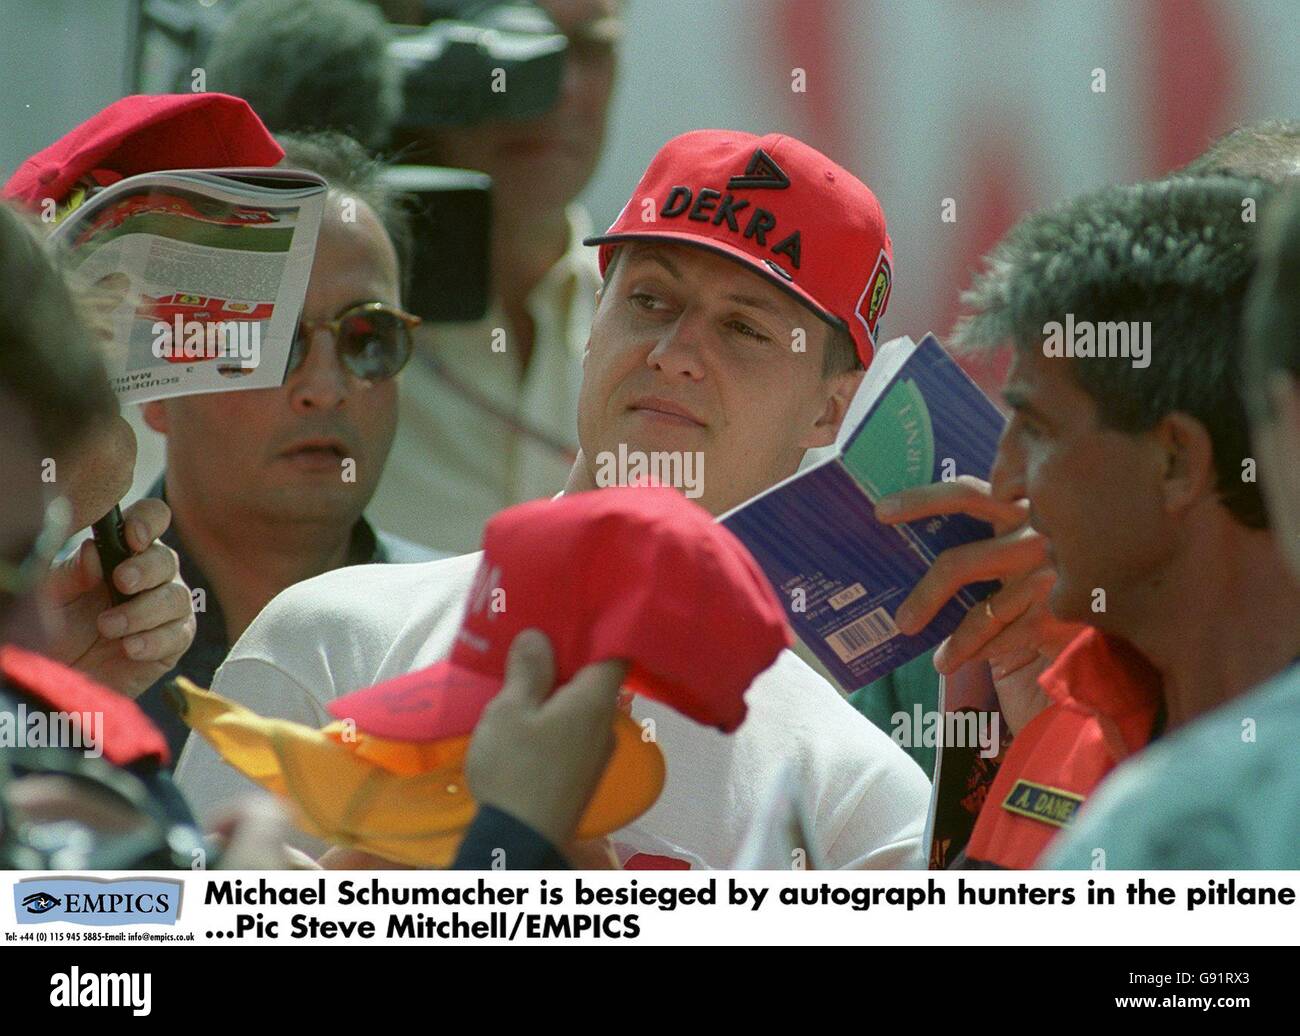 Formula One Motor Racing - Monaco Grand Prix - Practice. Michael Schumacher is besieged by autograph hunters in the pitlane Stock Photo